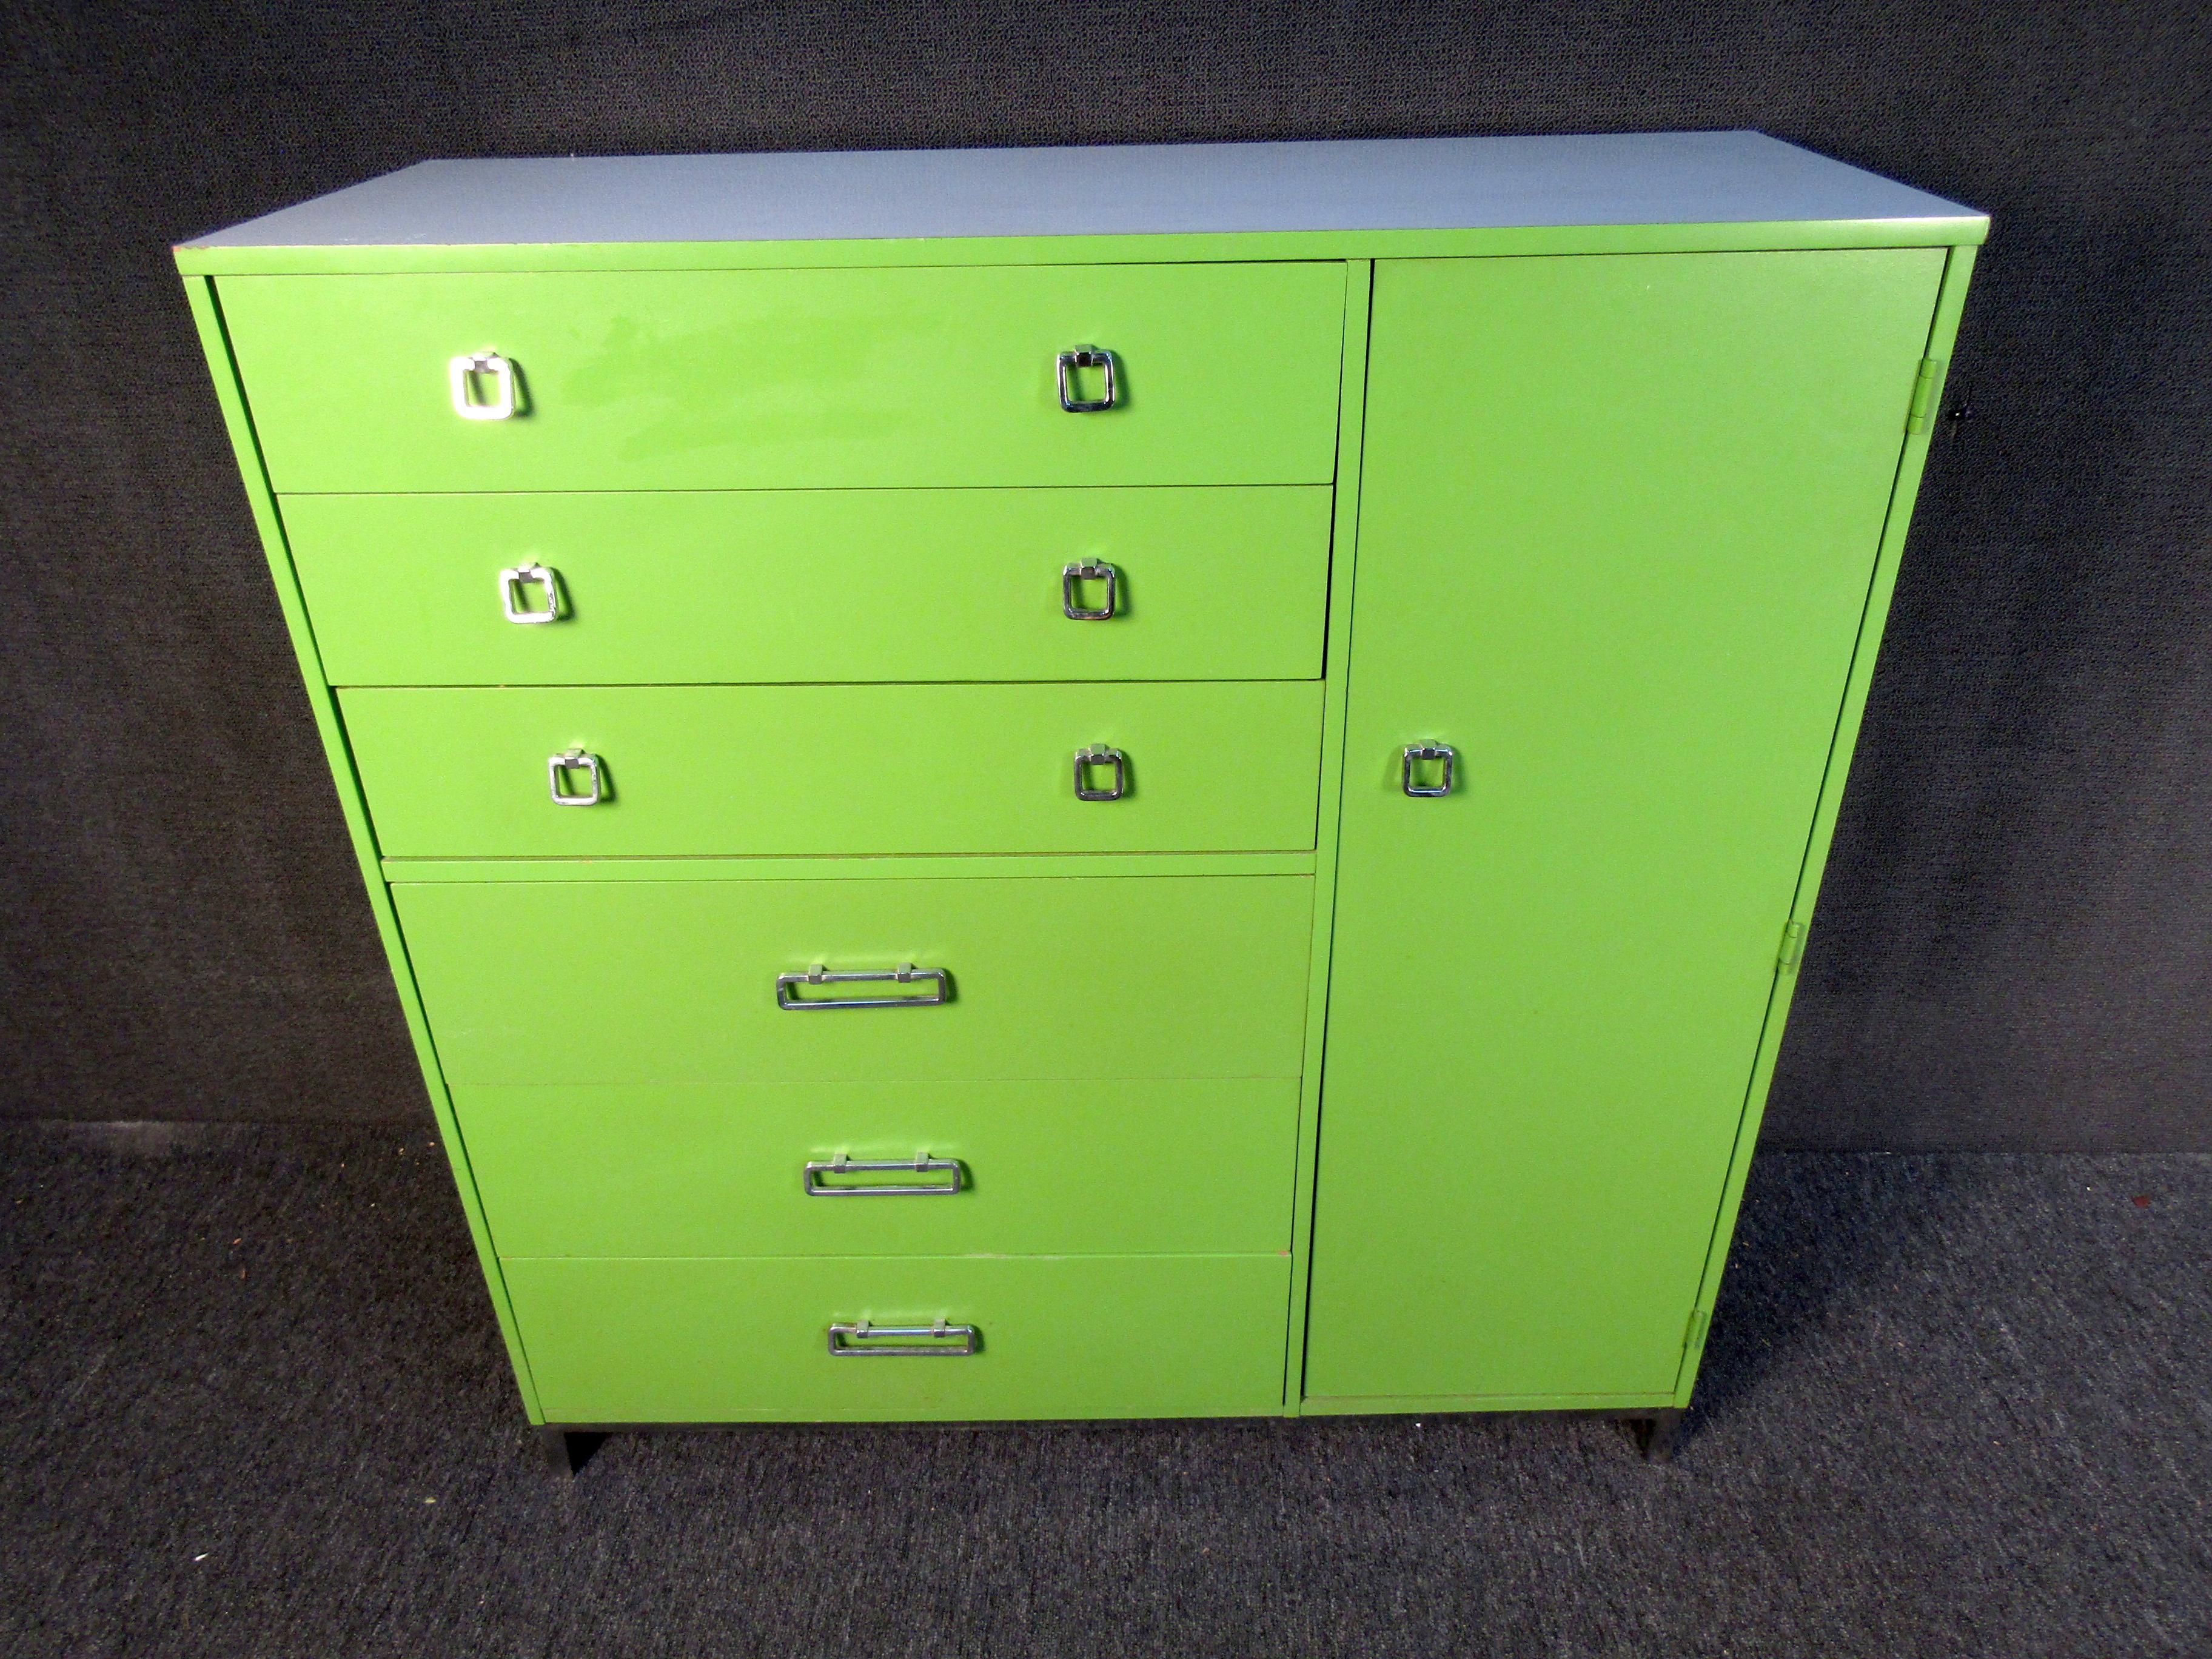 A tall designer dresser that will turn heads with its electric hue of green paint, this 80's designer piece offers plenty of storage with an eclectic design. Chrome drawer pulls compliment the dresser's color and make this dresser truly unique and